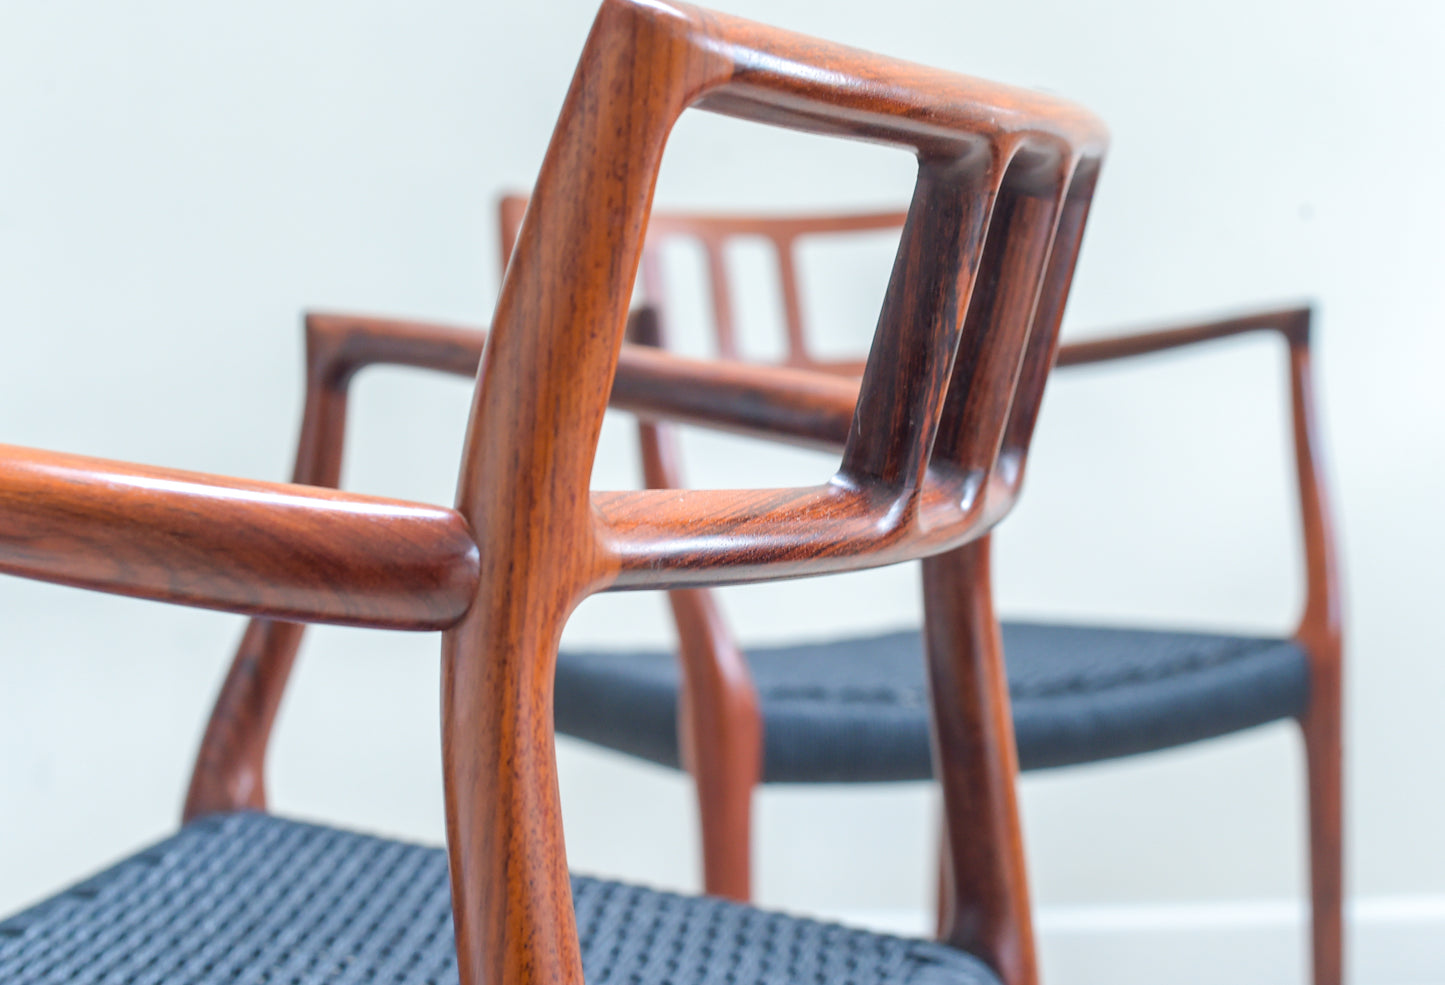 A scarce pair of Niels Otto Møller Model 64 Rosewood Carver Chairs for J L Moller, Denmark.